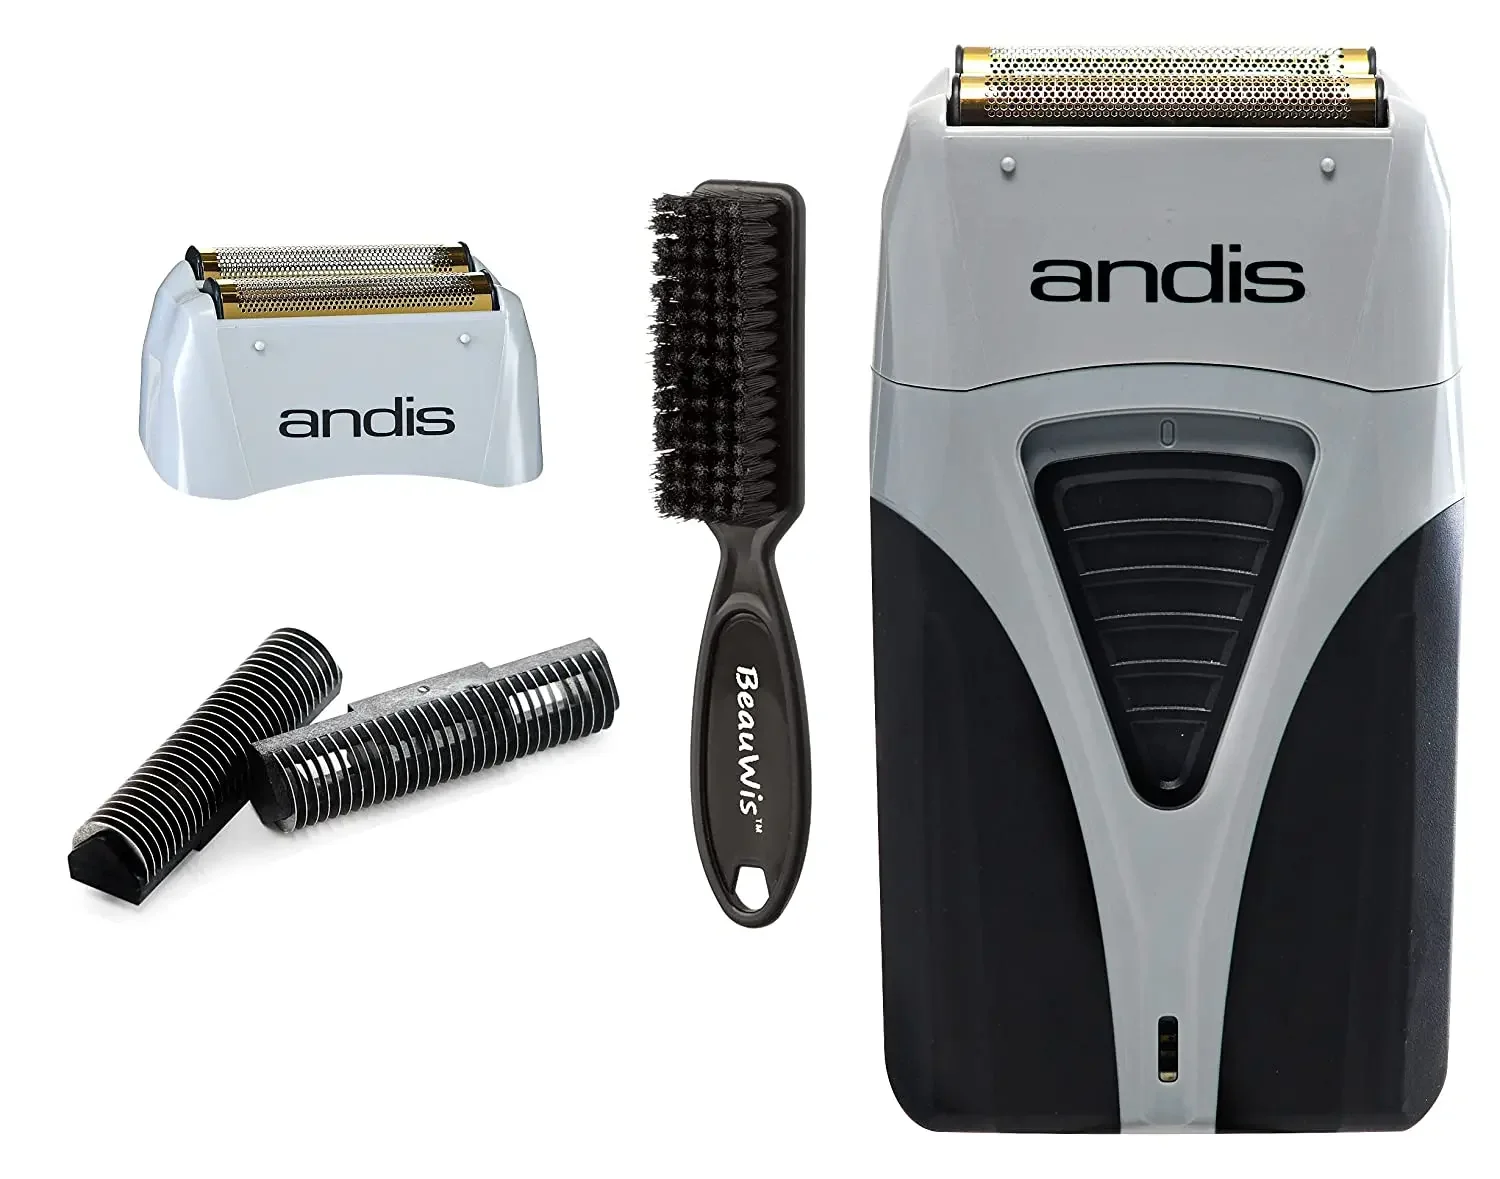 Original American ANDIS Profoil Lithium Plus 17205 barber hair cleaning electric shaver for men razor bald hair clipper supplies